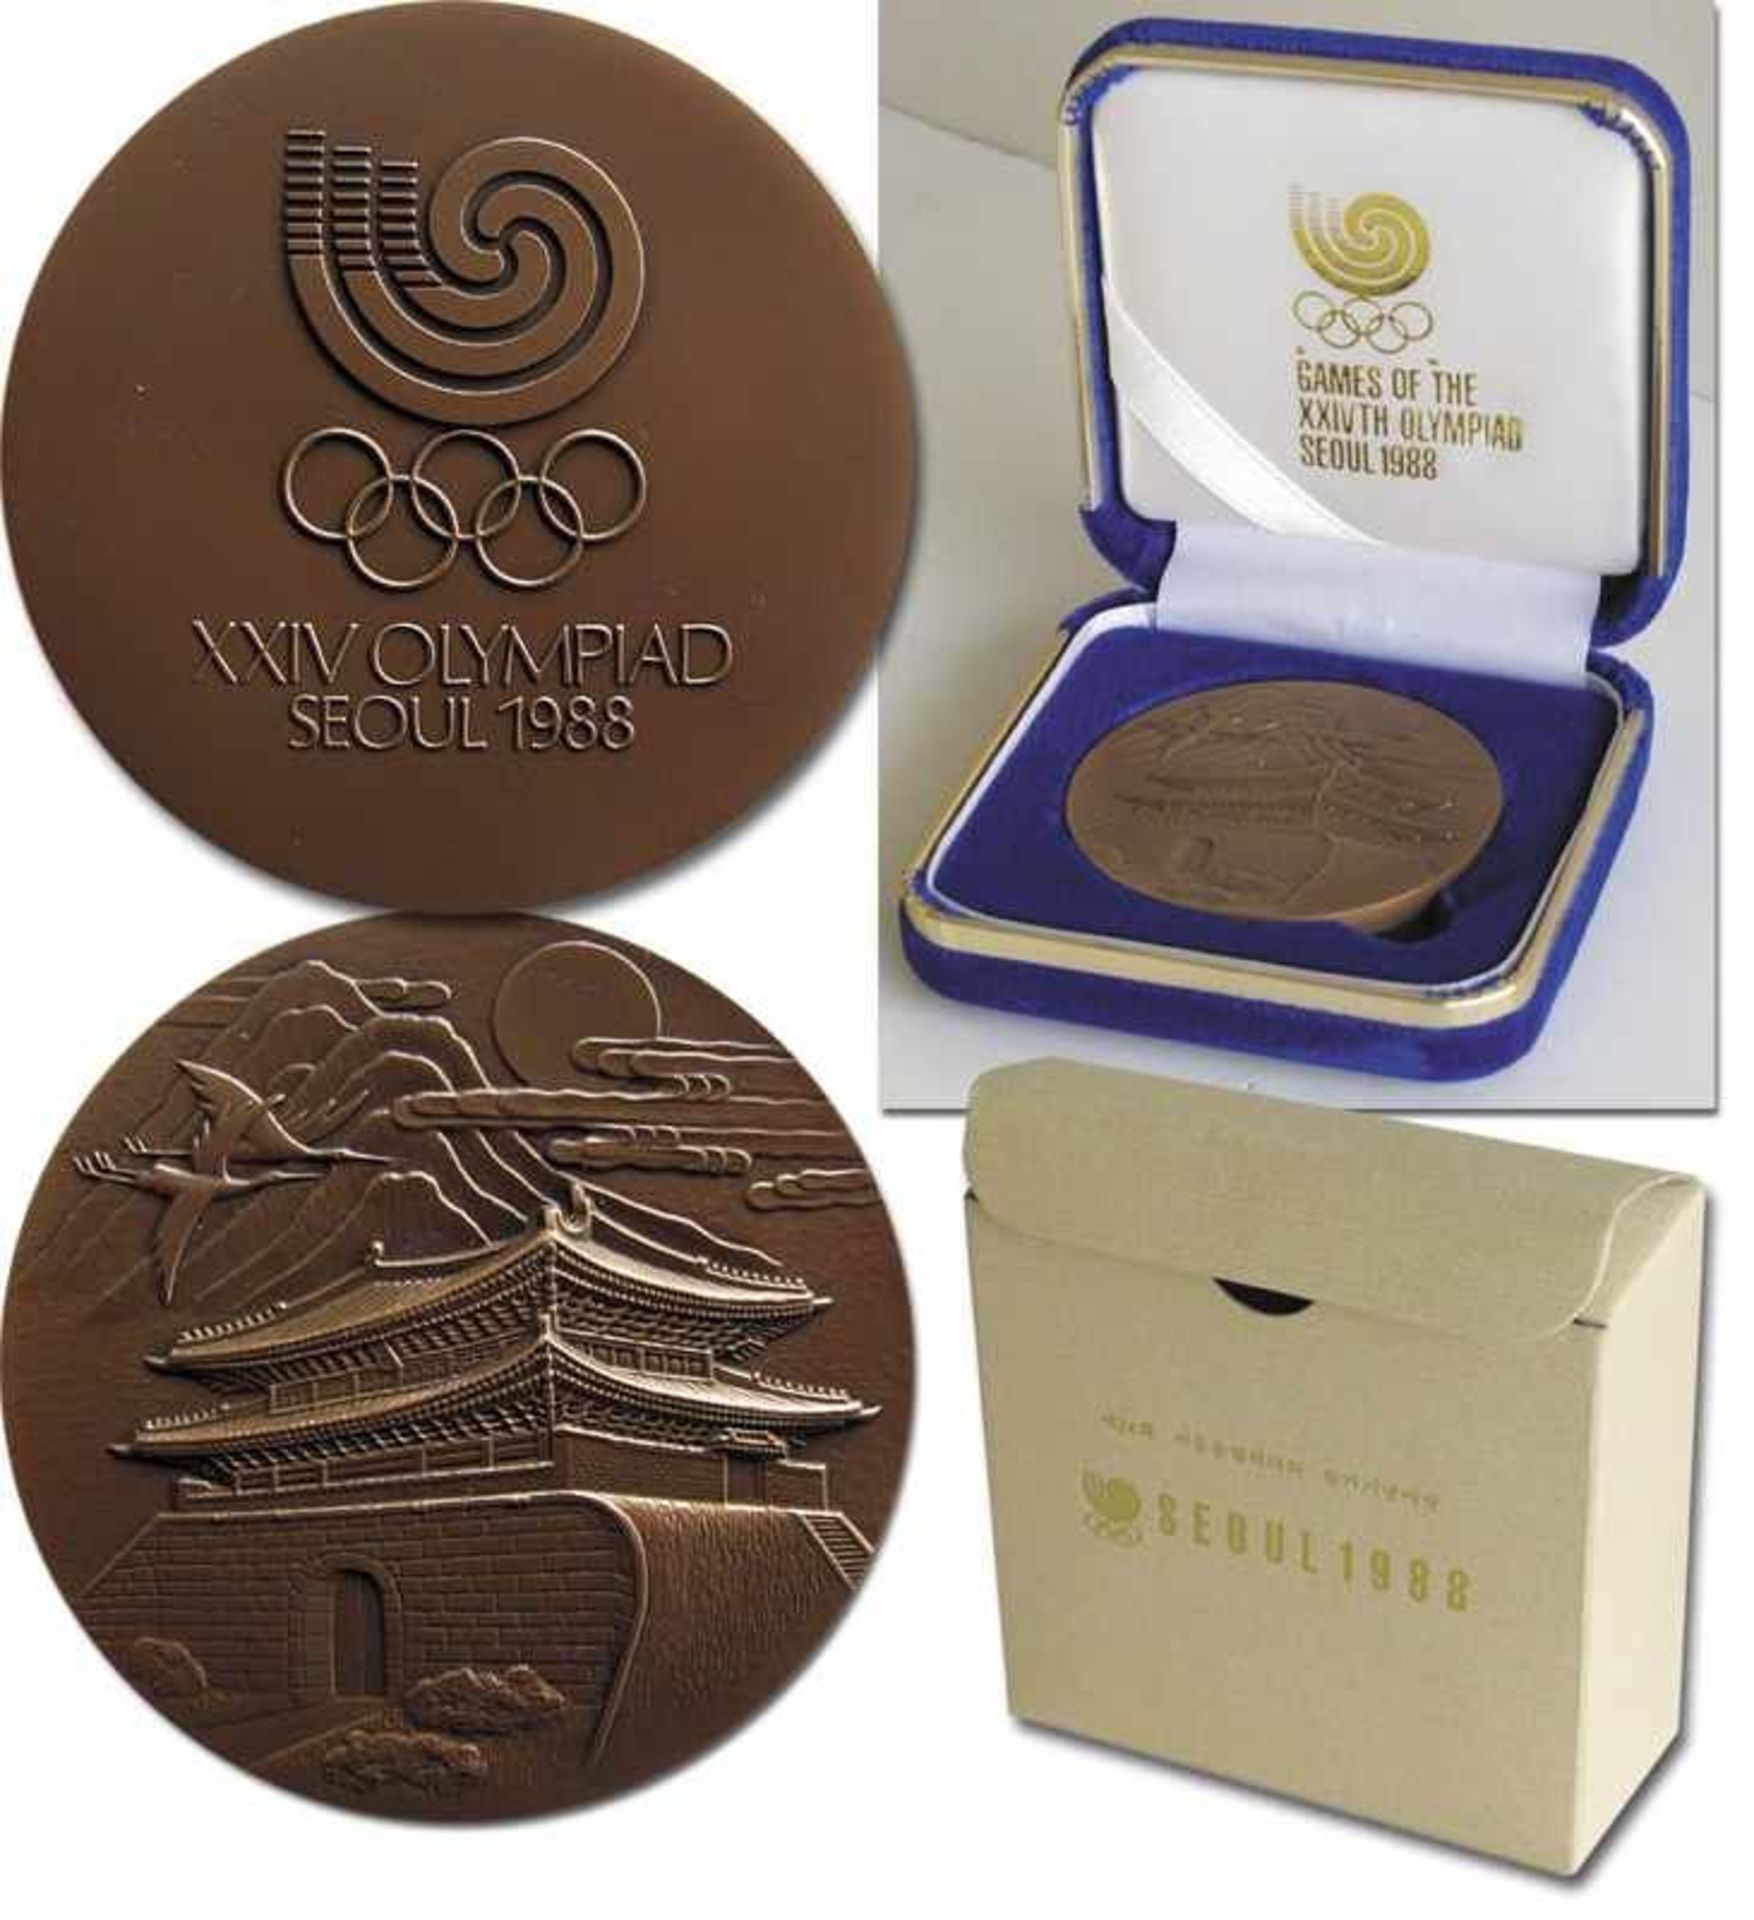 Participation Medal: Olympic Games 1988 Seoul - Participation medal for athletes who participated in